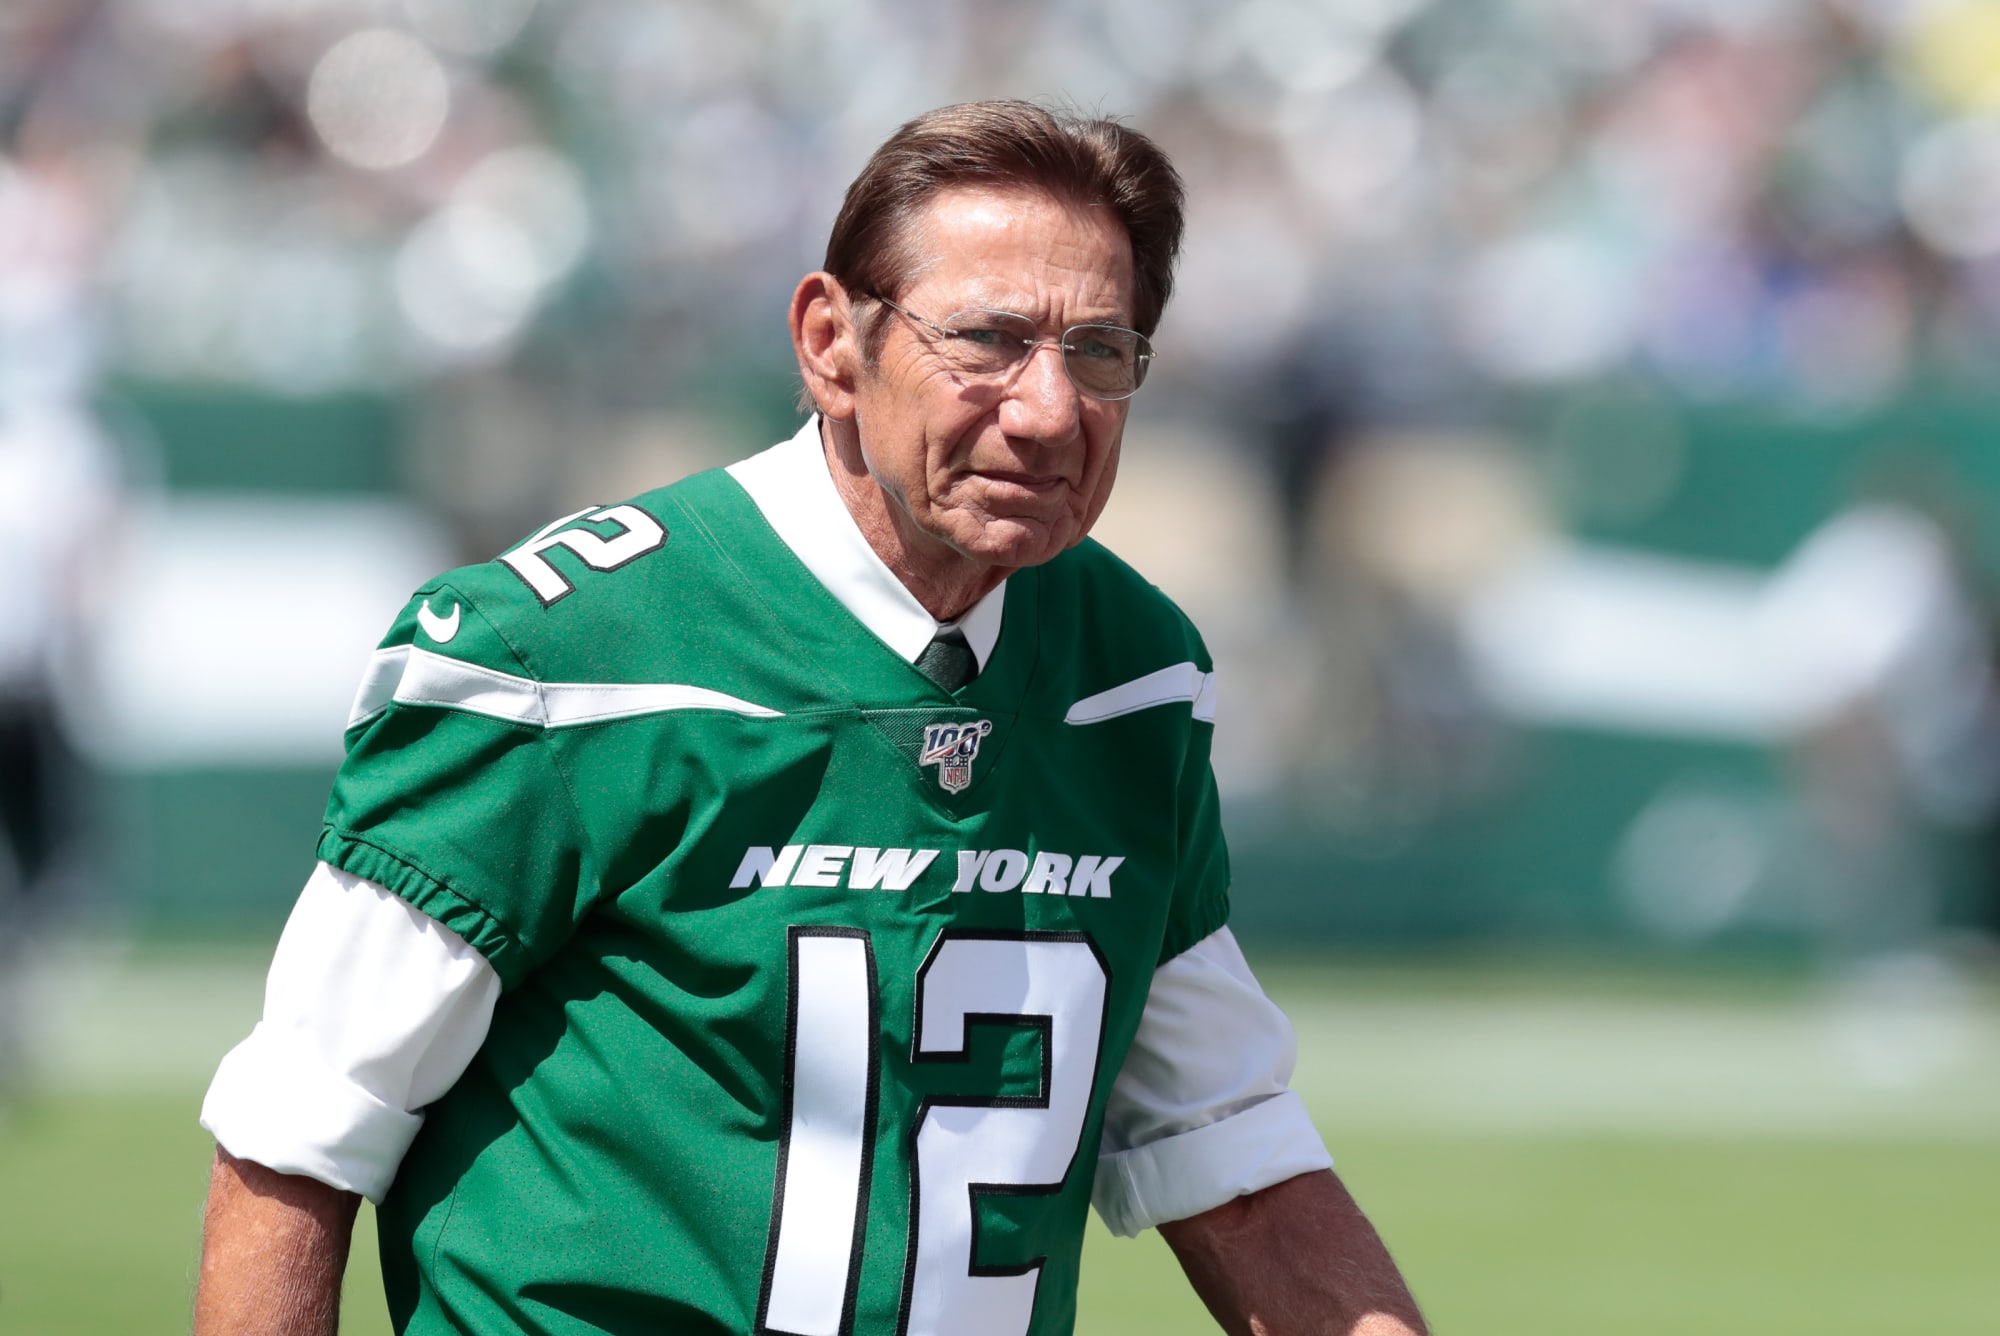 Joe Namath gives Aaron Rodgers his blessing for No. 12 if QB goes to Jets